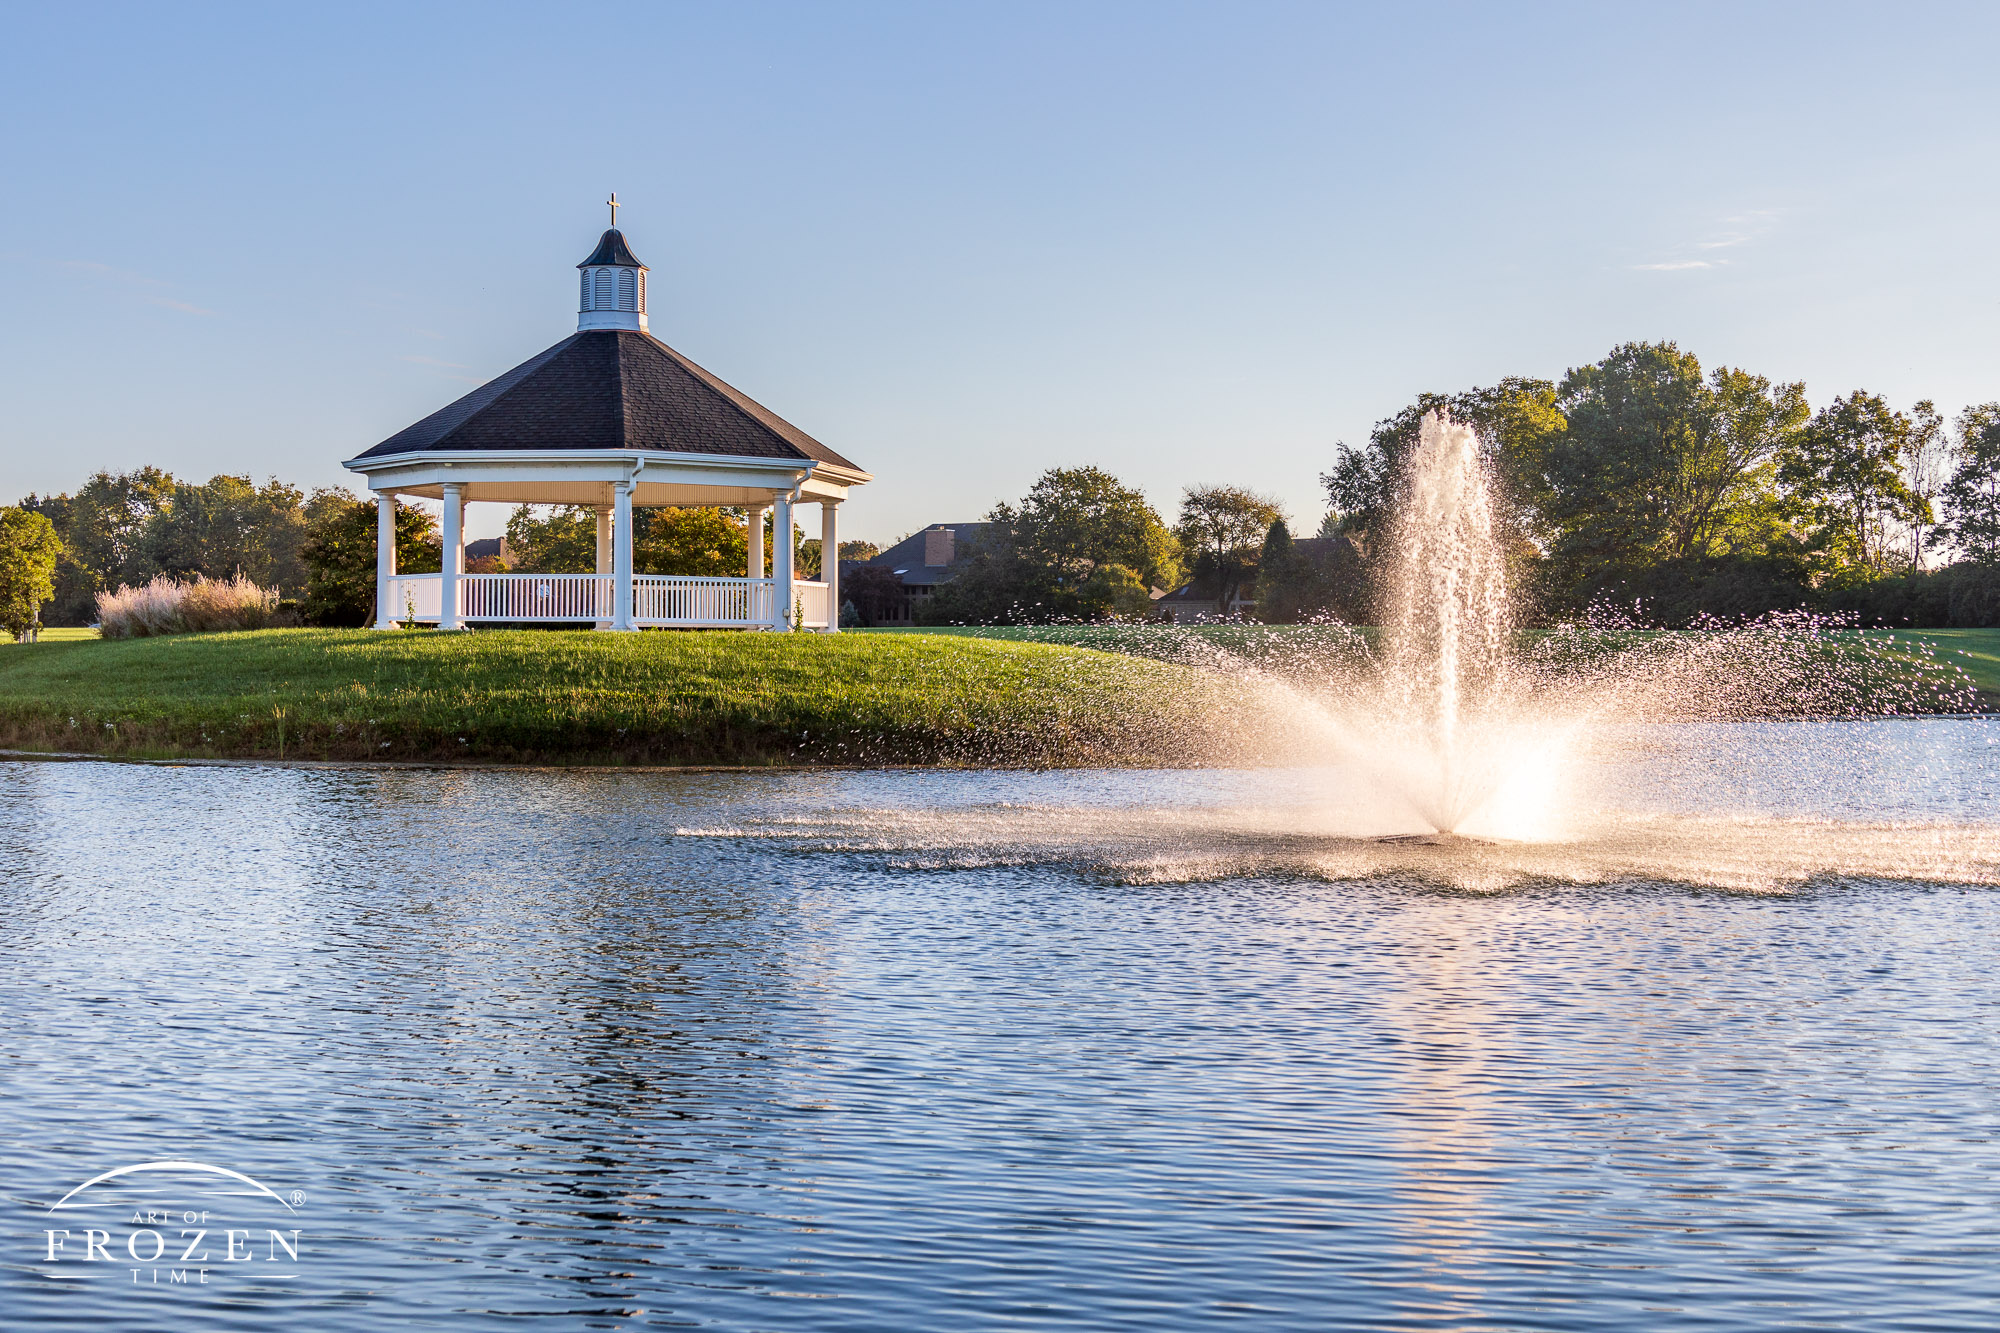 A fountain in Grace Park, Centerville, Ohio, glistens in the morning light as a gazebo resides in the background